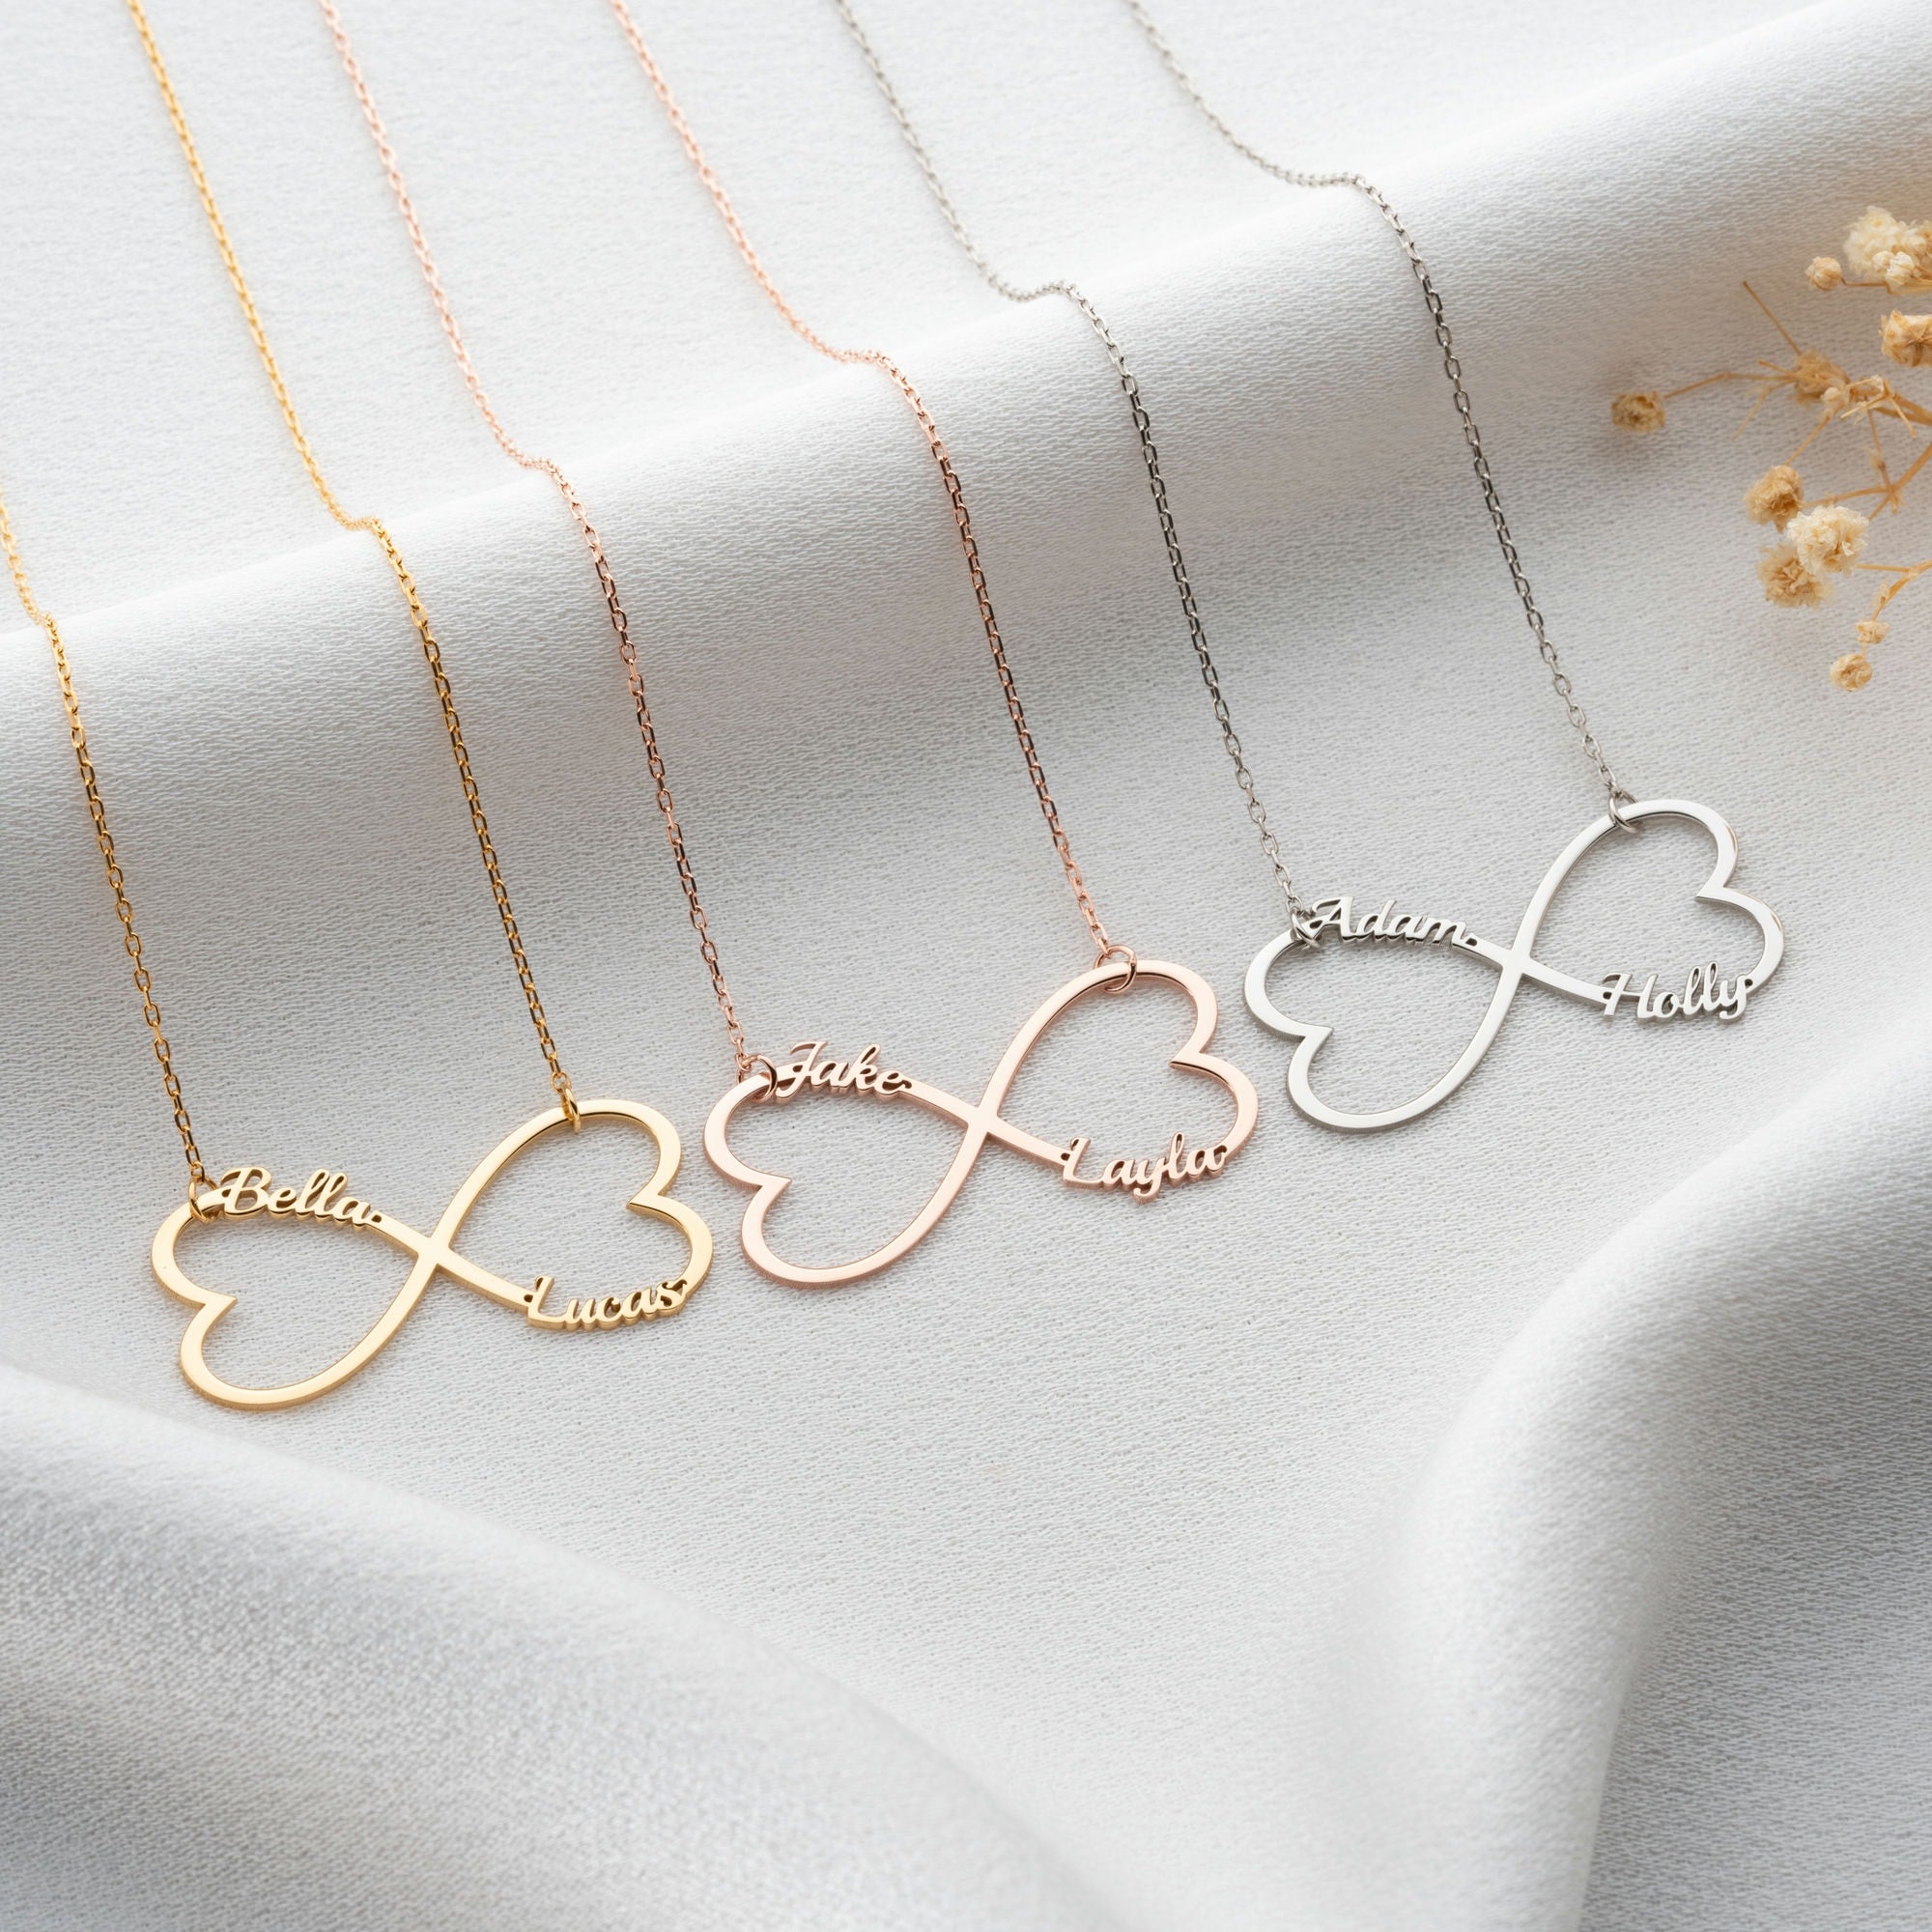 Infinity Heart Necklace With Names